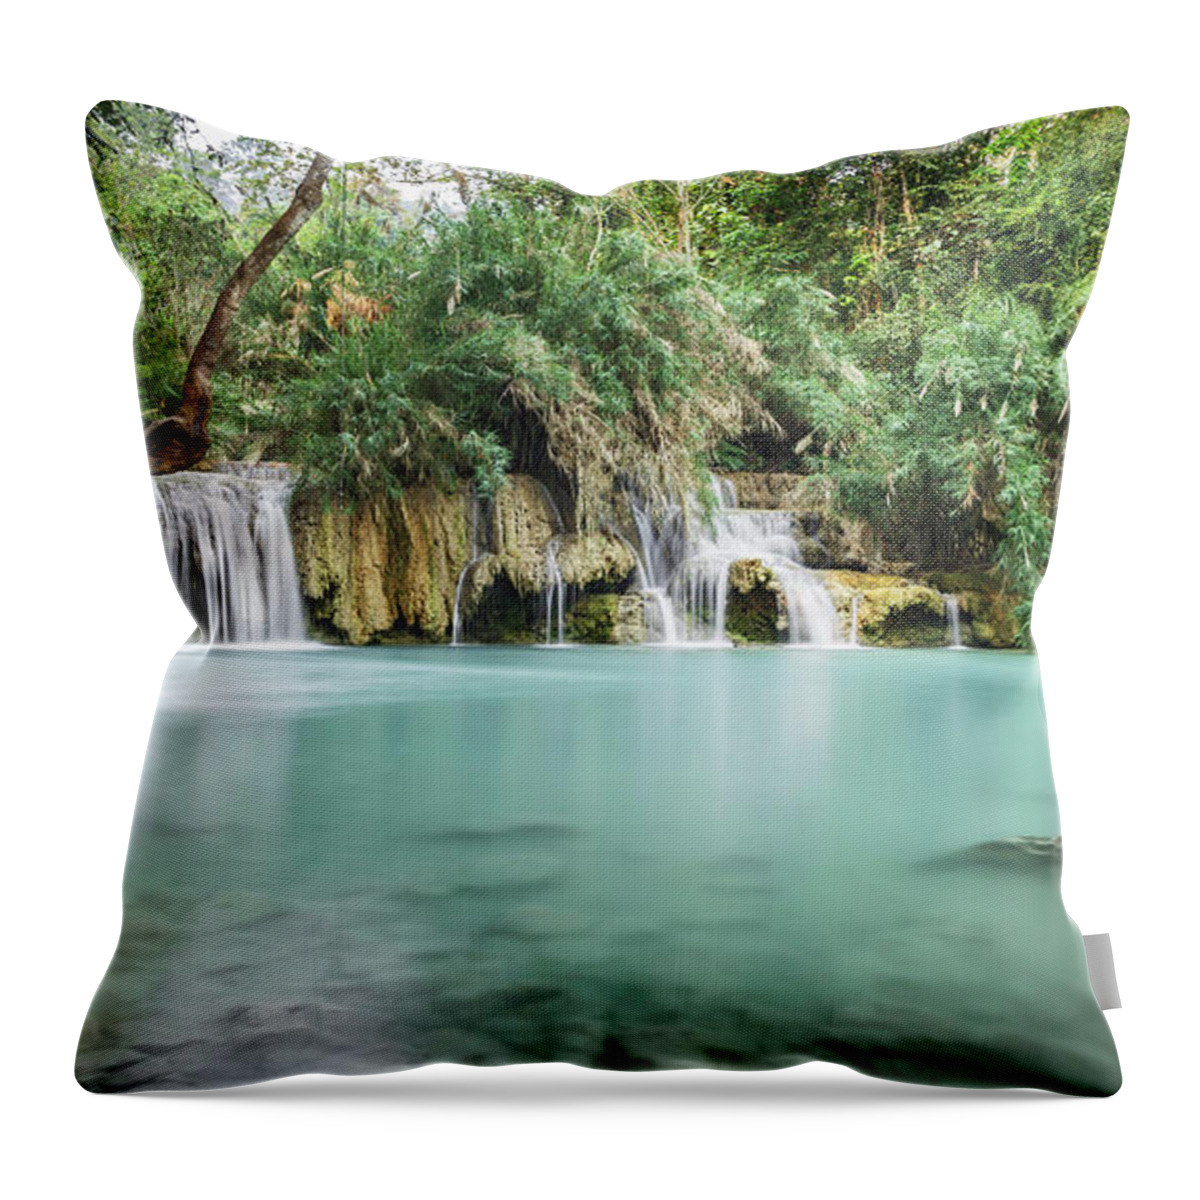 Scenics Throw Pillow featuring the photograph Kouang Si Waterfalls by Www.sergiodiaz.net